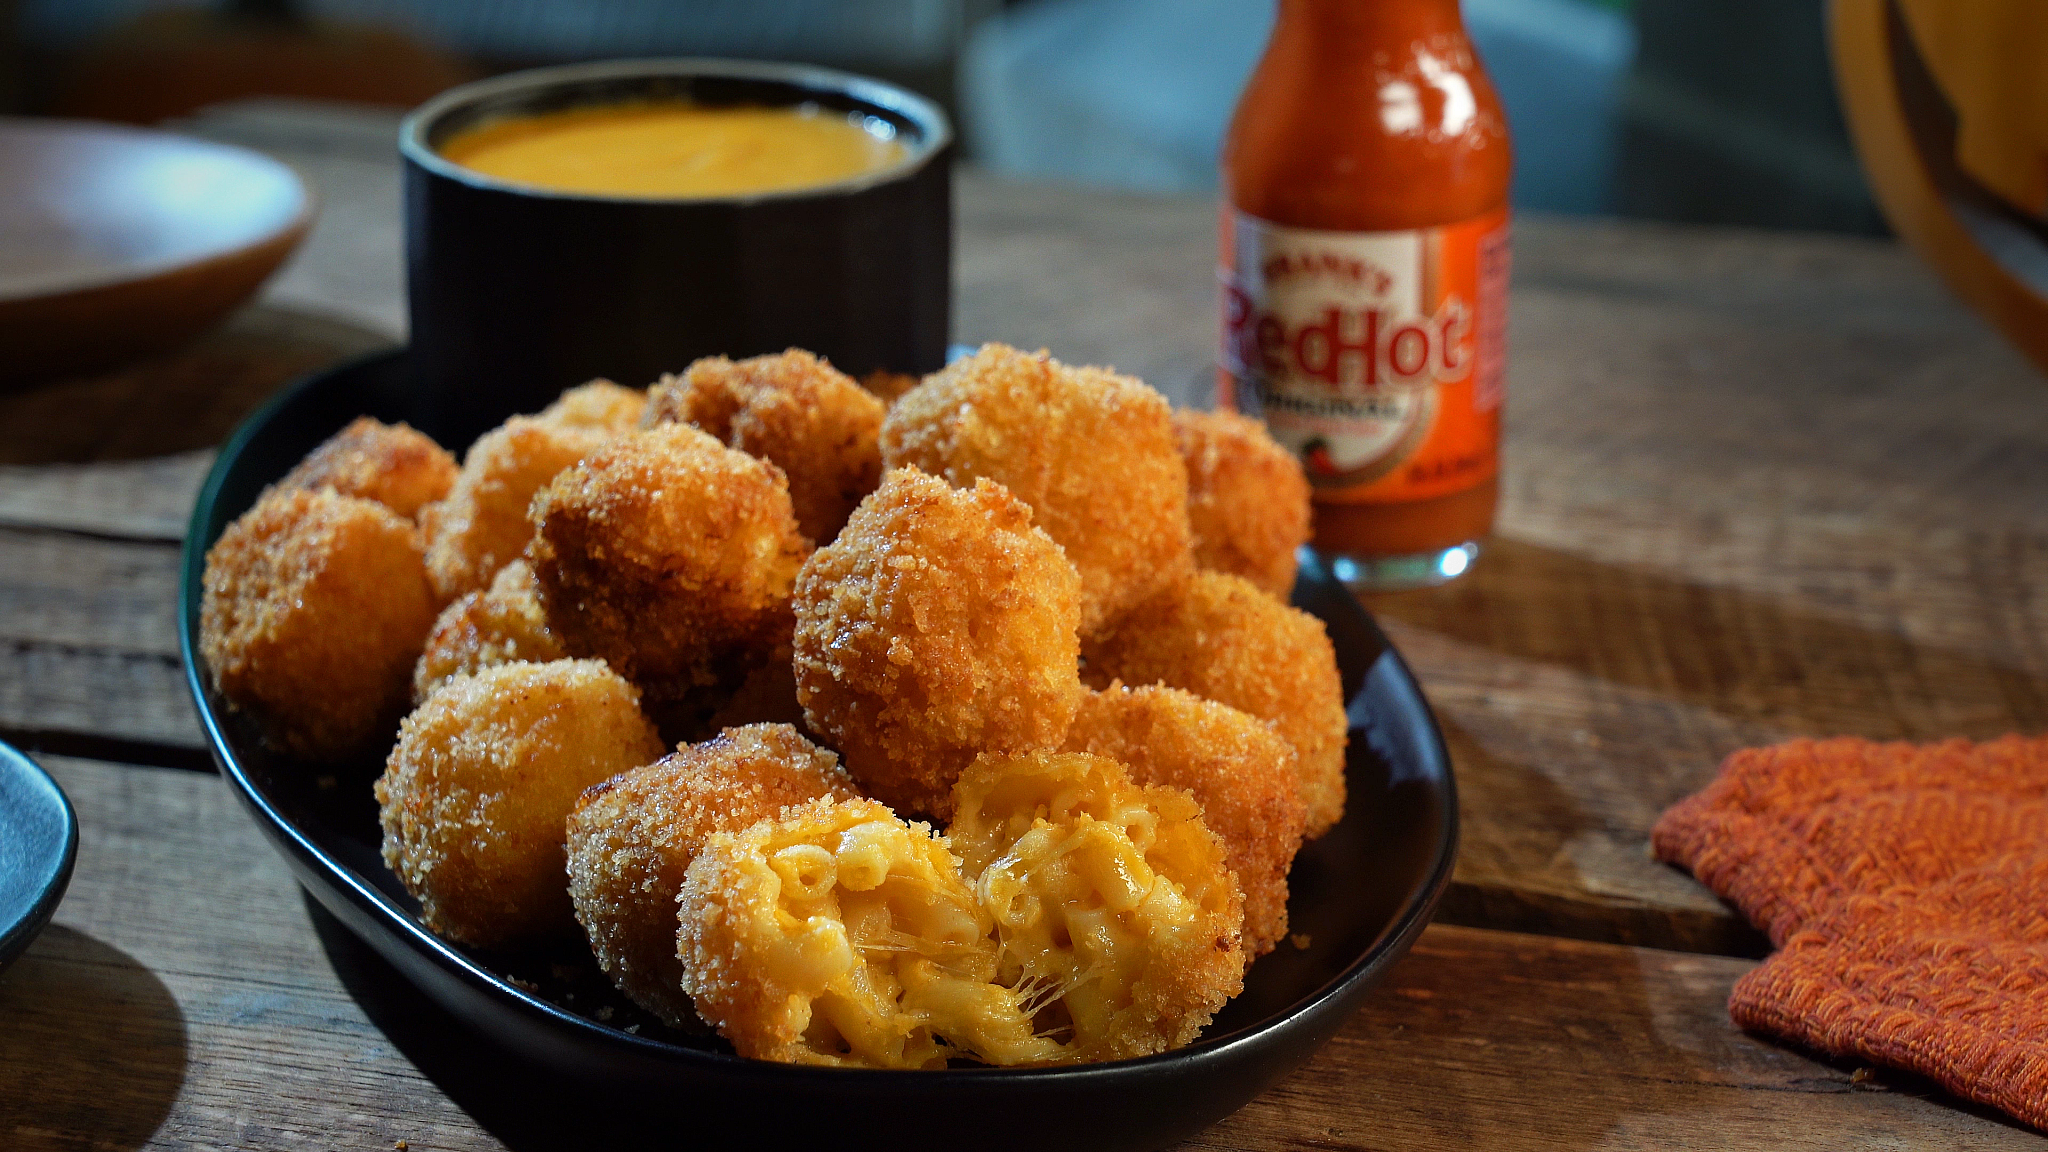 easy fried mac and cheese bites